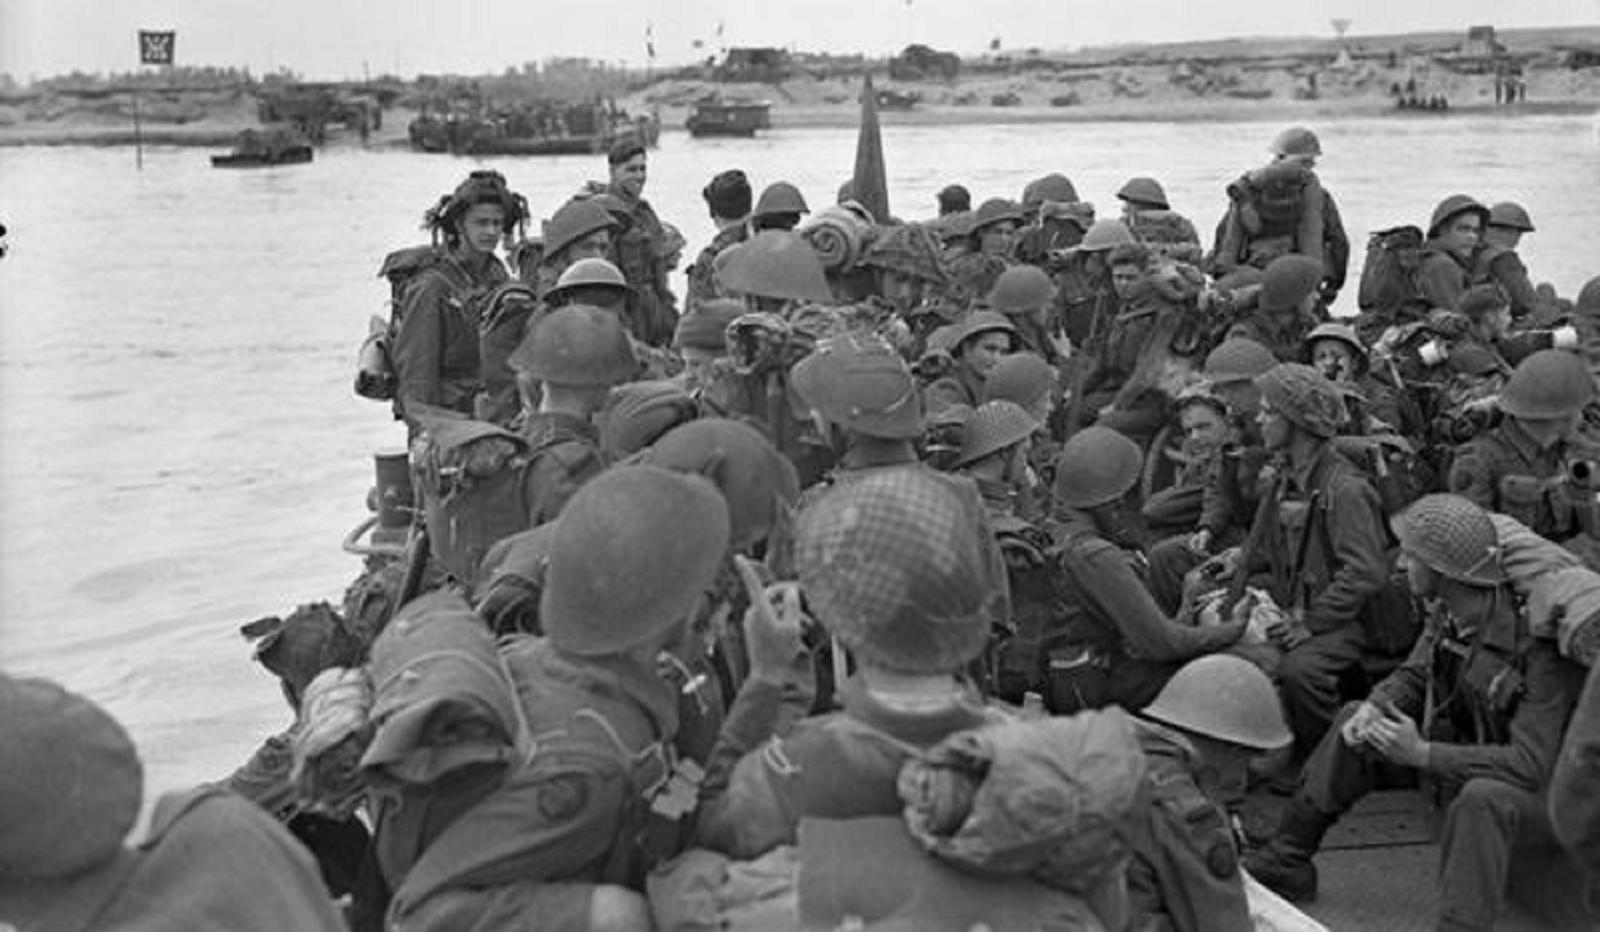 A landing craft full of infantrymen approaches Juno Beach on D-Day.